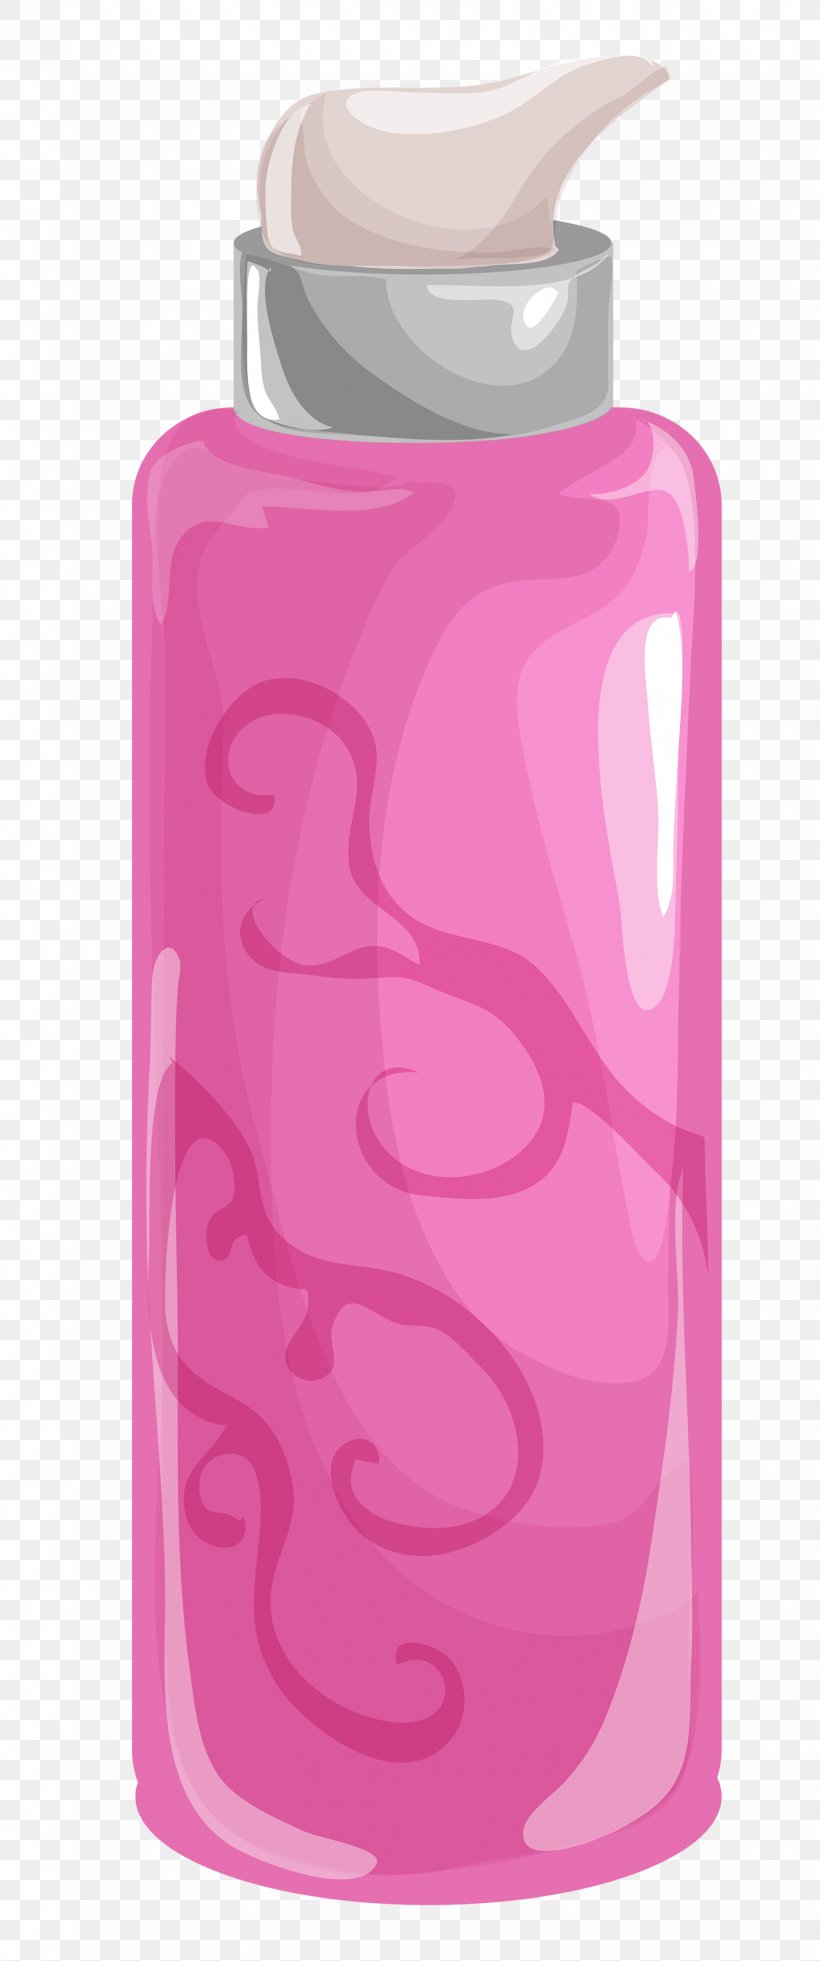 Lotion Sunscreen Clip Art, PNG, 1442x3449px, Lotion, Bottle, Container, Cosmetics, Cream Download Free